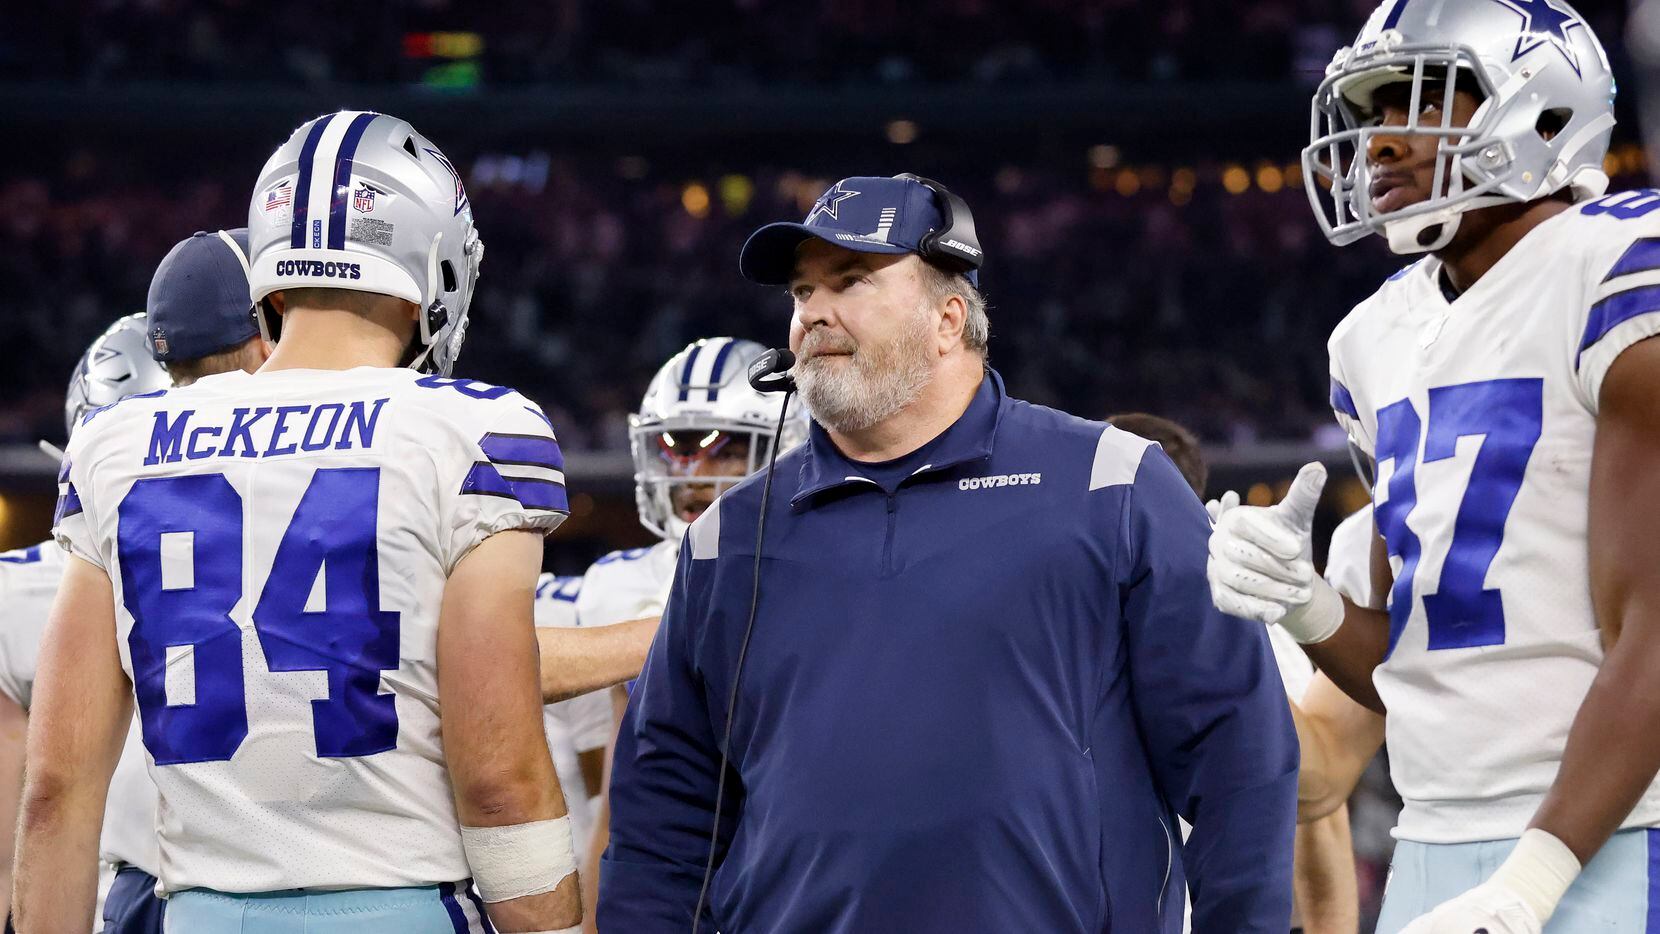 The Dallas Cowboys offense comes off the field as head coach Mike McCarthy looks on during the second half against the Las Vegas Raiders at AT&T Stadium in Arlington, November 25, 2021. The Cowboys lost in overtime to the Raiders, 36-33.